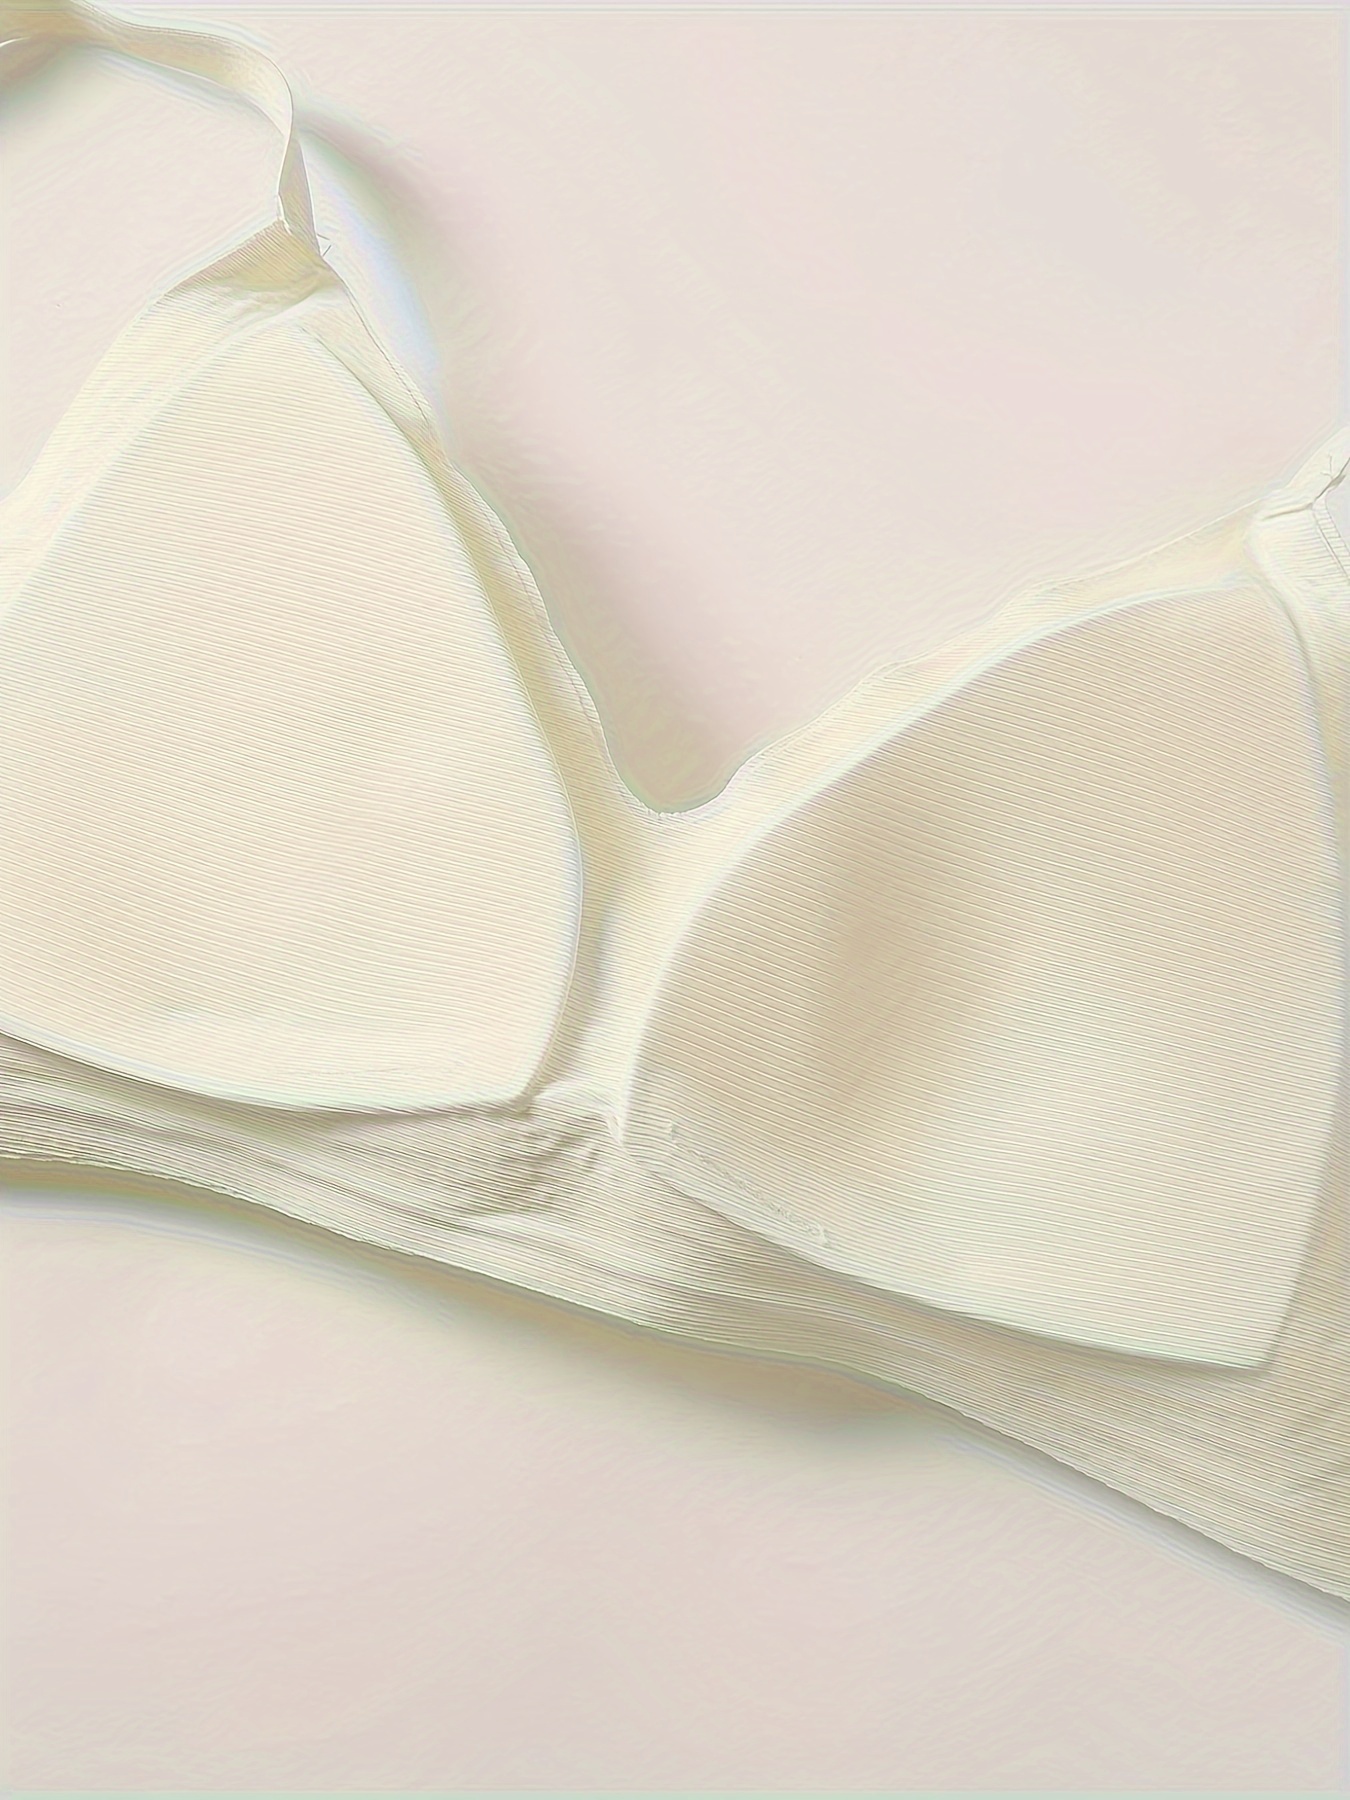 White Cotton Bra Cup Manufactory Many Sizes From # 8 to #22